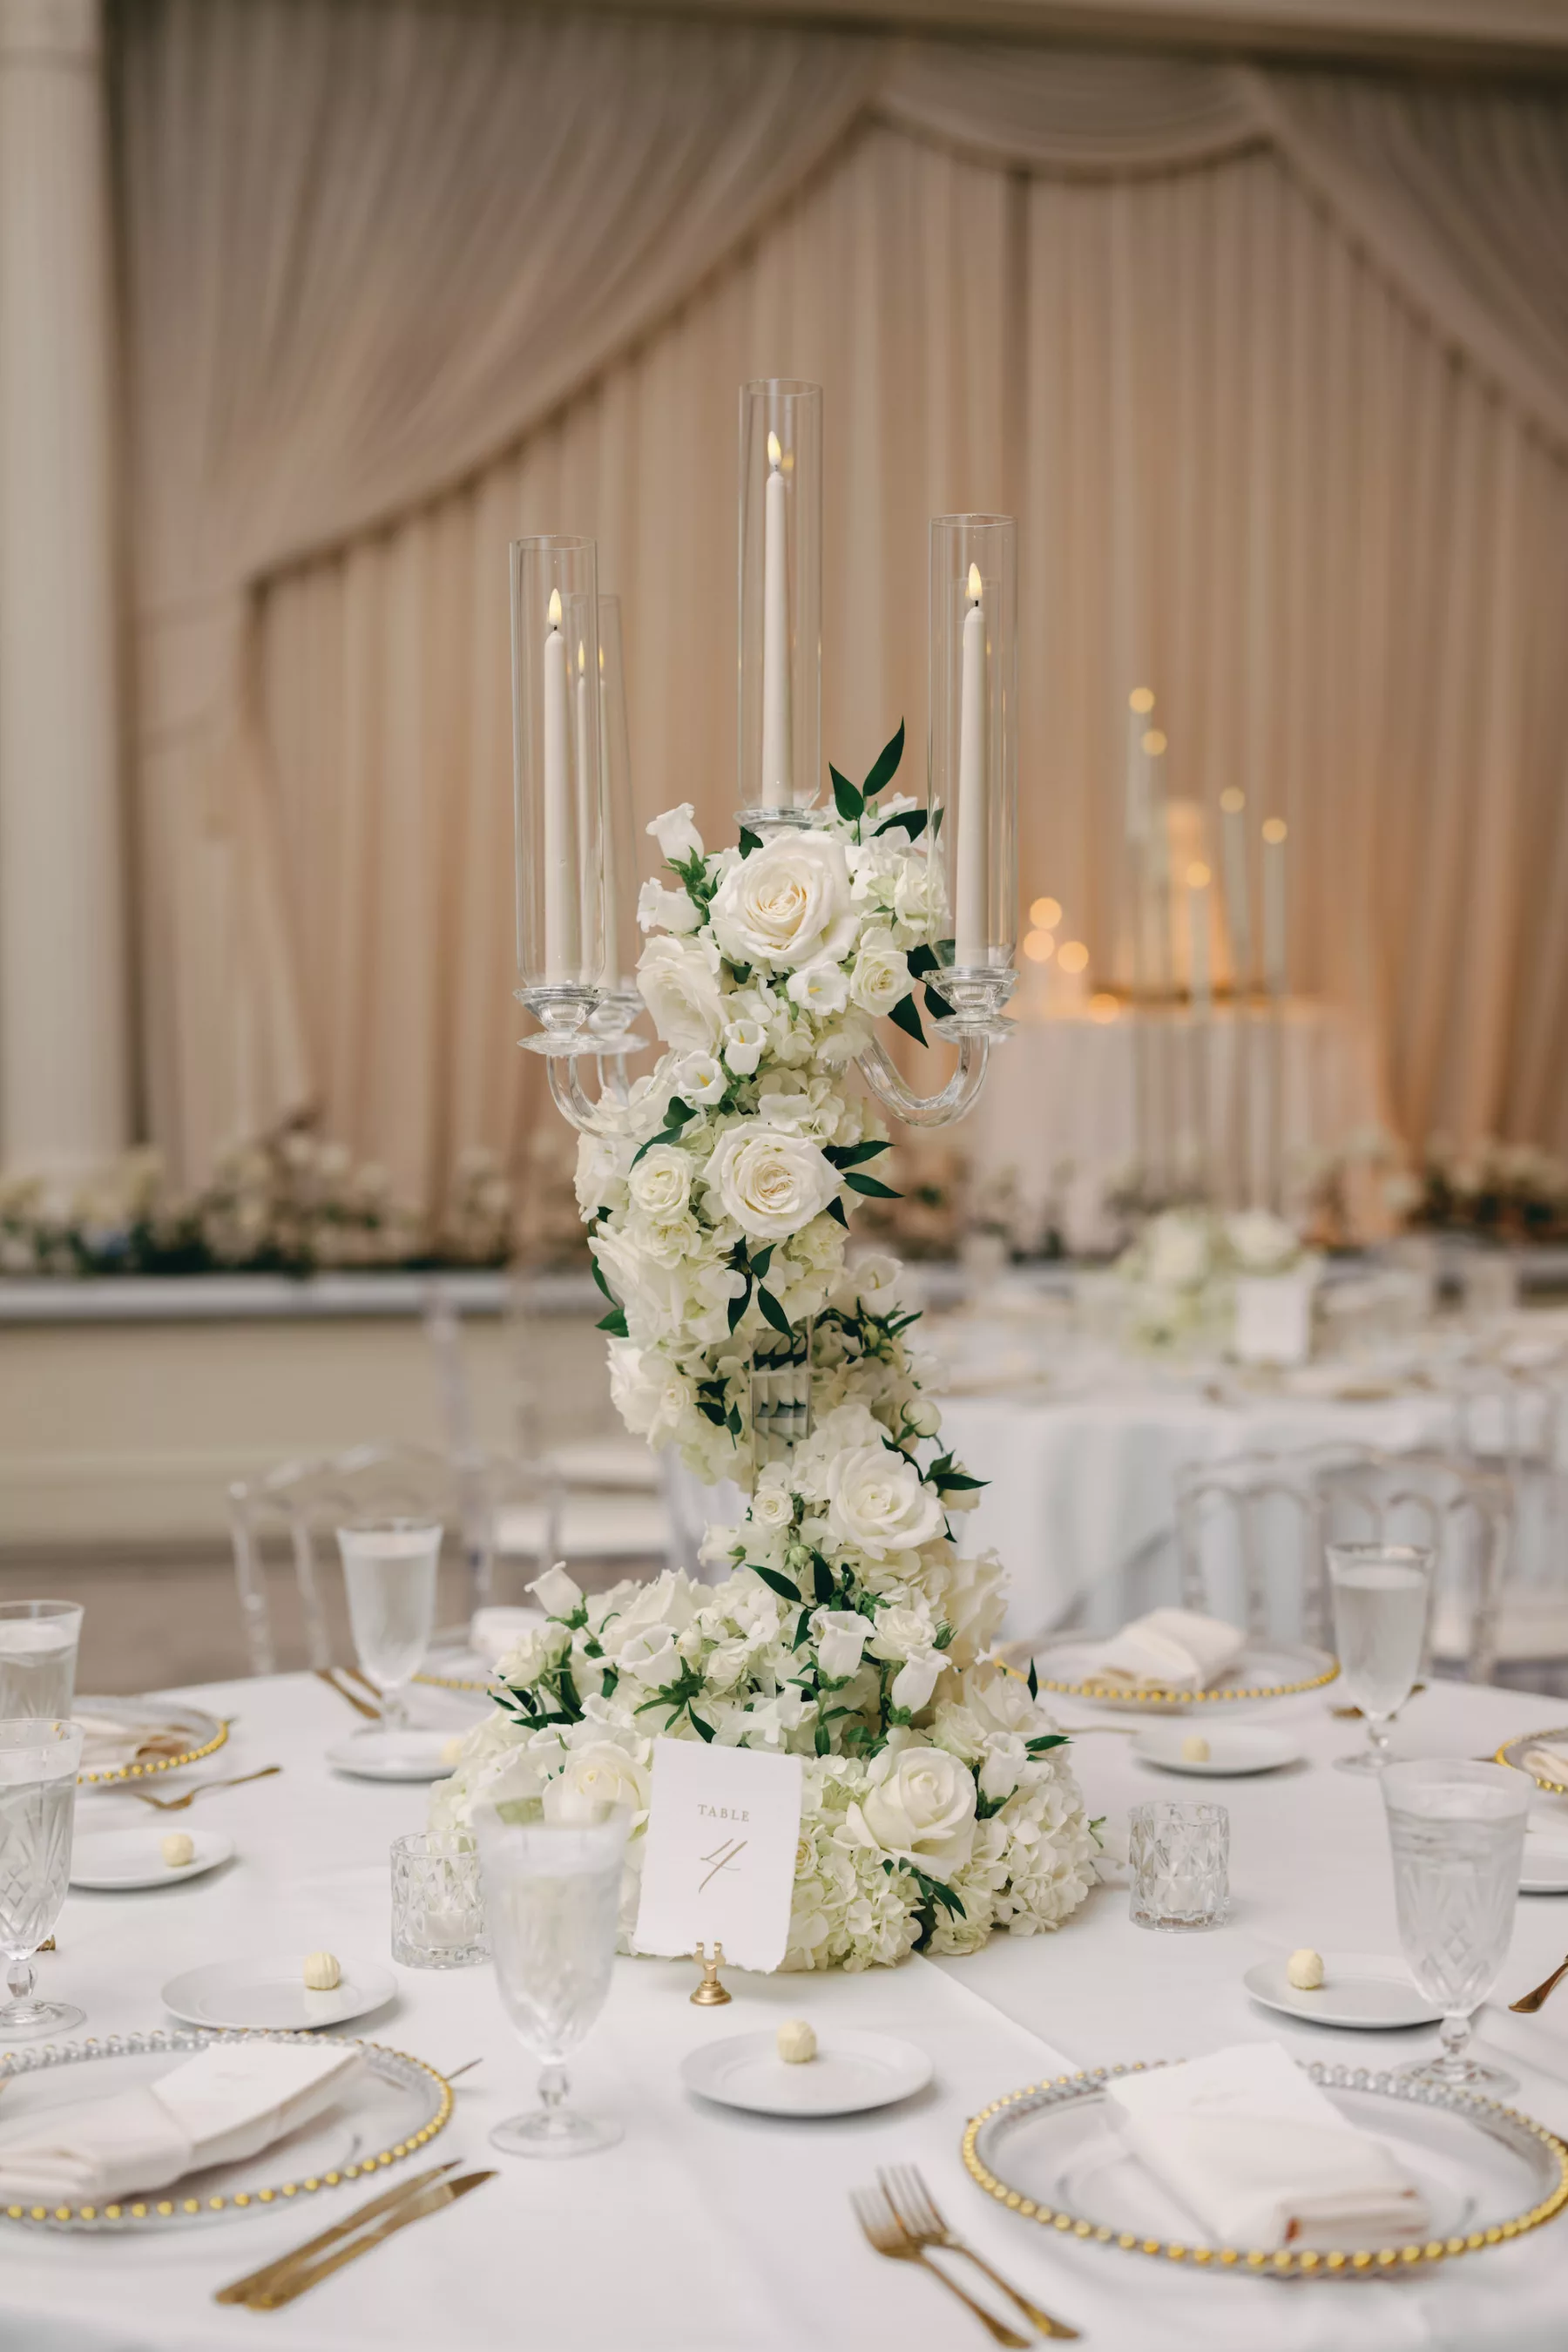 Timeless Monochromatic Wedding Reception Centerpiece Decor Ideas | Silver Candelabra Wrapped in White Roses and Greenery | White and Gold Place Setting Inspiration